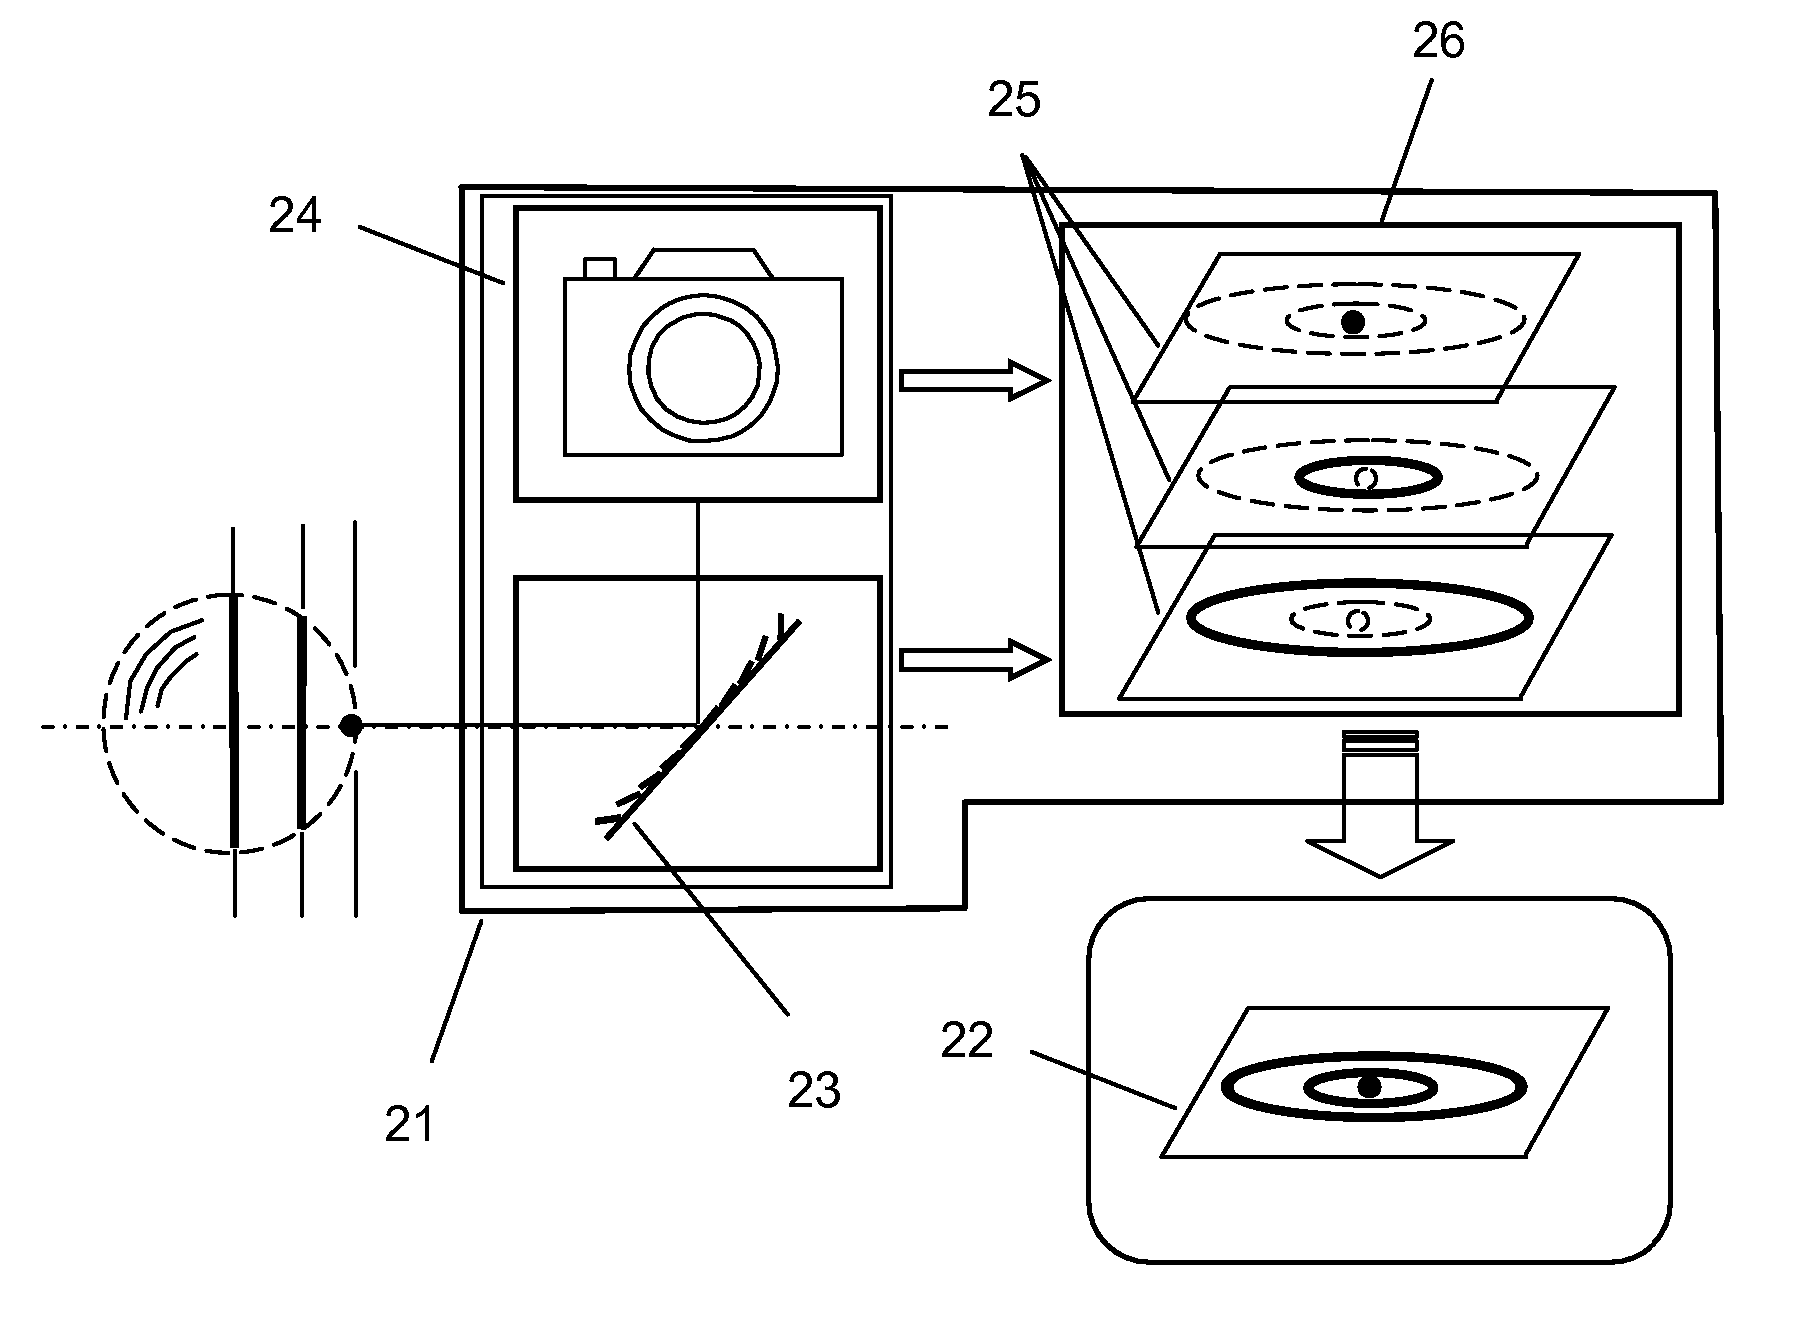 Three-dimensional imaging system